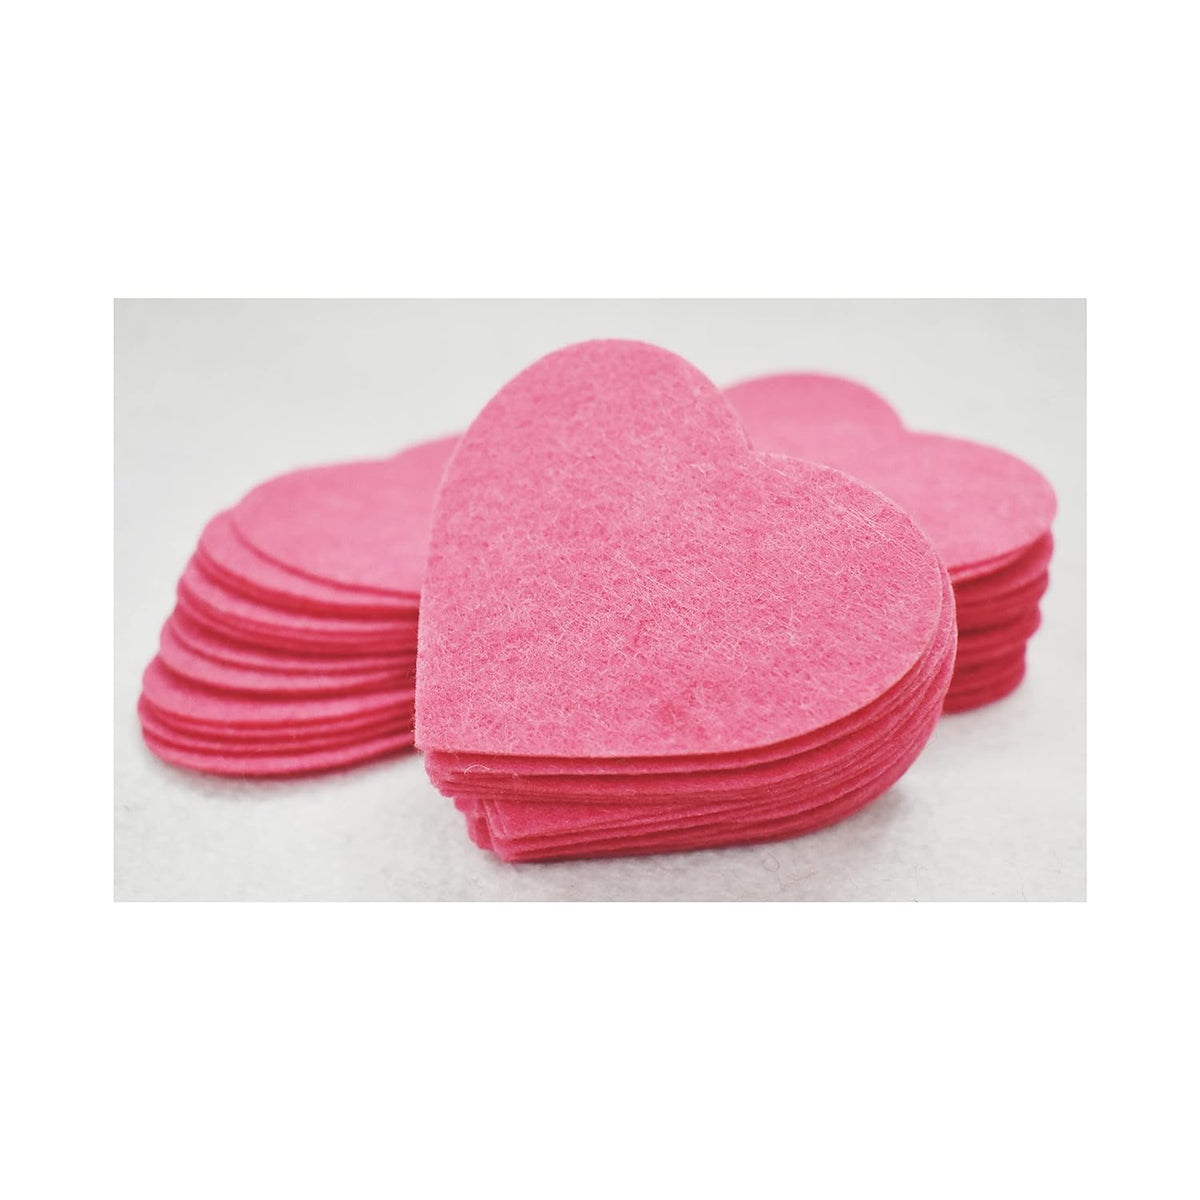 Presents 3" Felt Cutouts for Love in Valentine Colors/Garland-Decoration/PATCHING/Wedding Decoration Supplies, Pack of 100 Pcs - Haoser